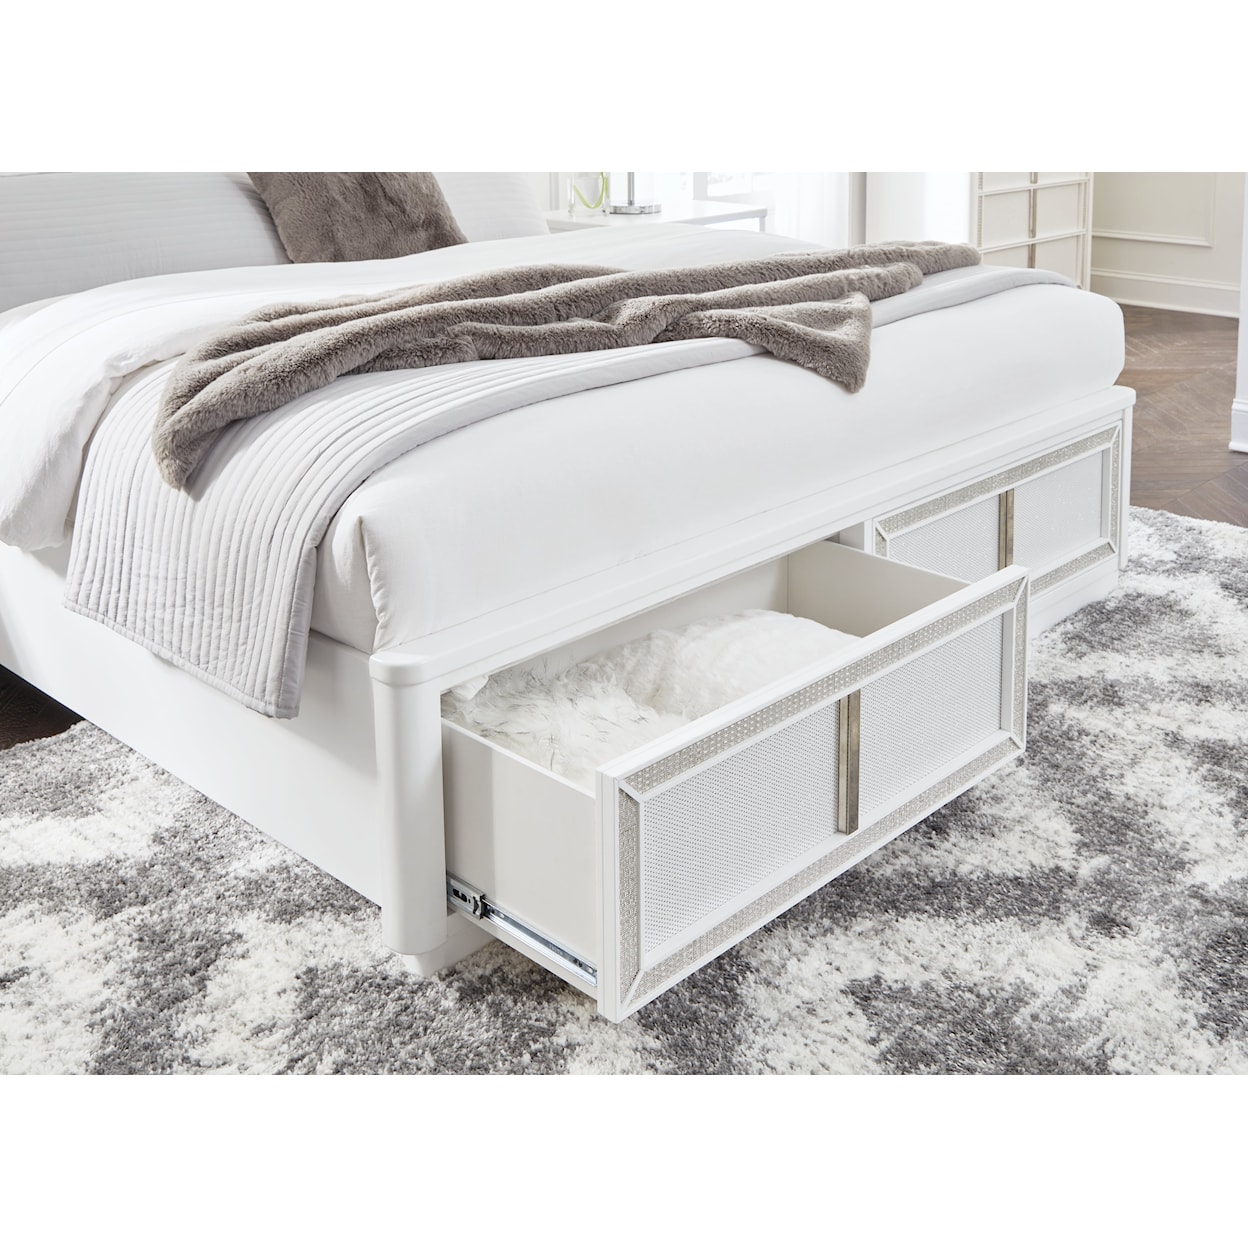 Benchcraft Chalanna California King Upholstered Storage Bed